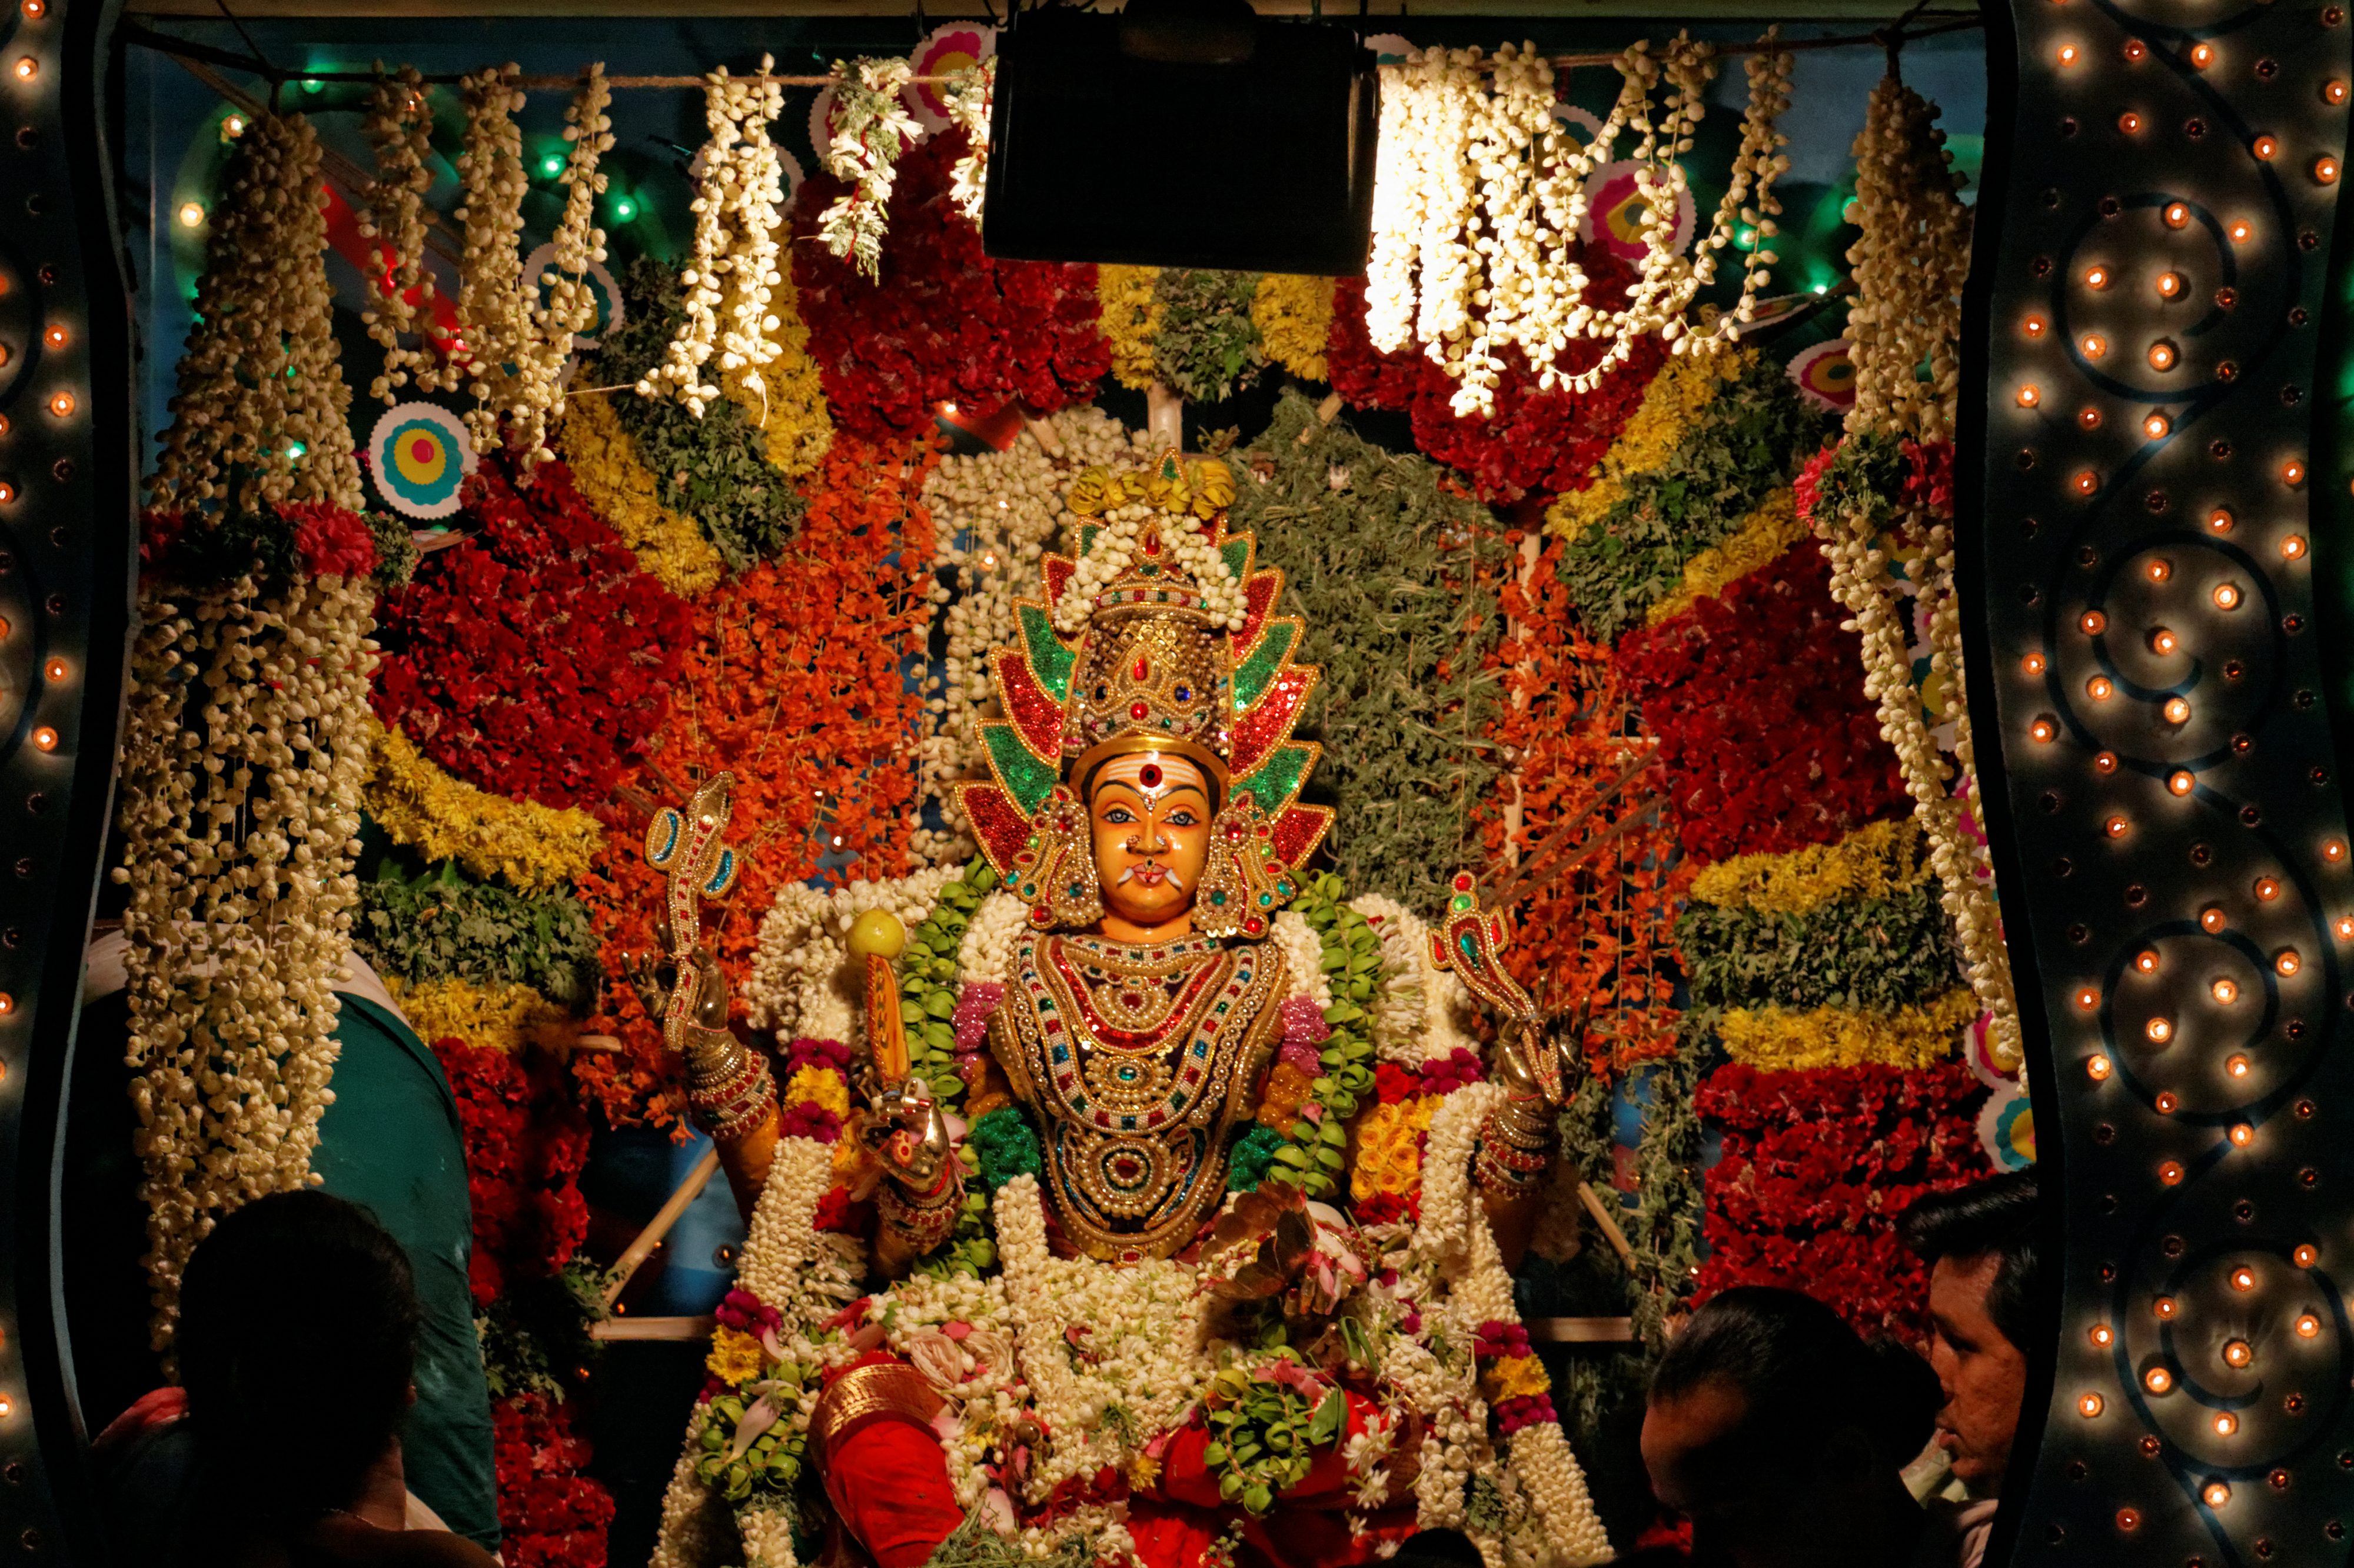 Mariamman (Sourced from Wikipedia)